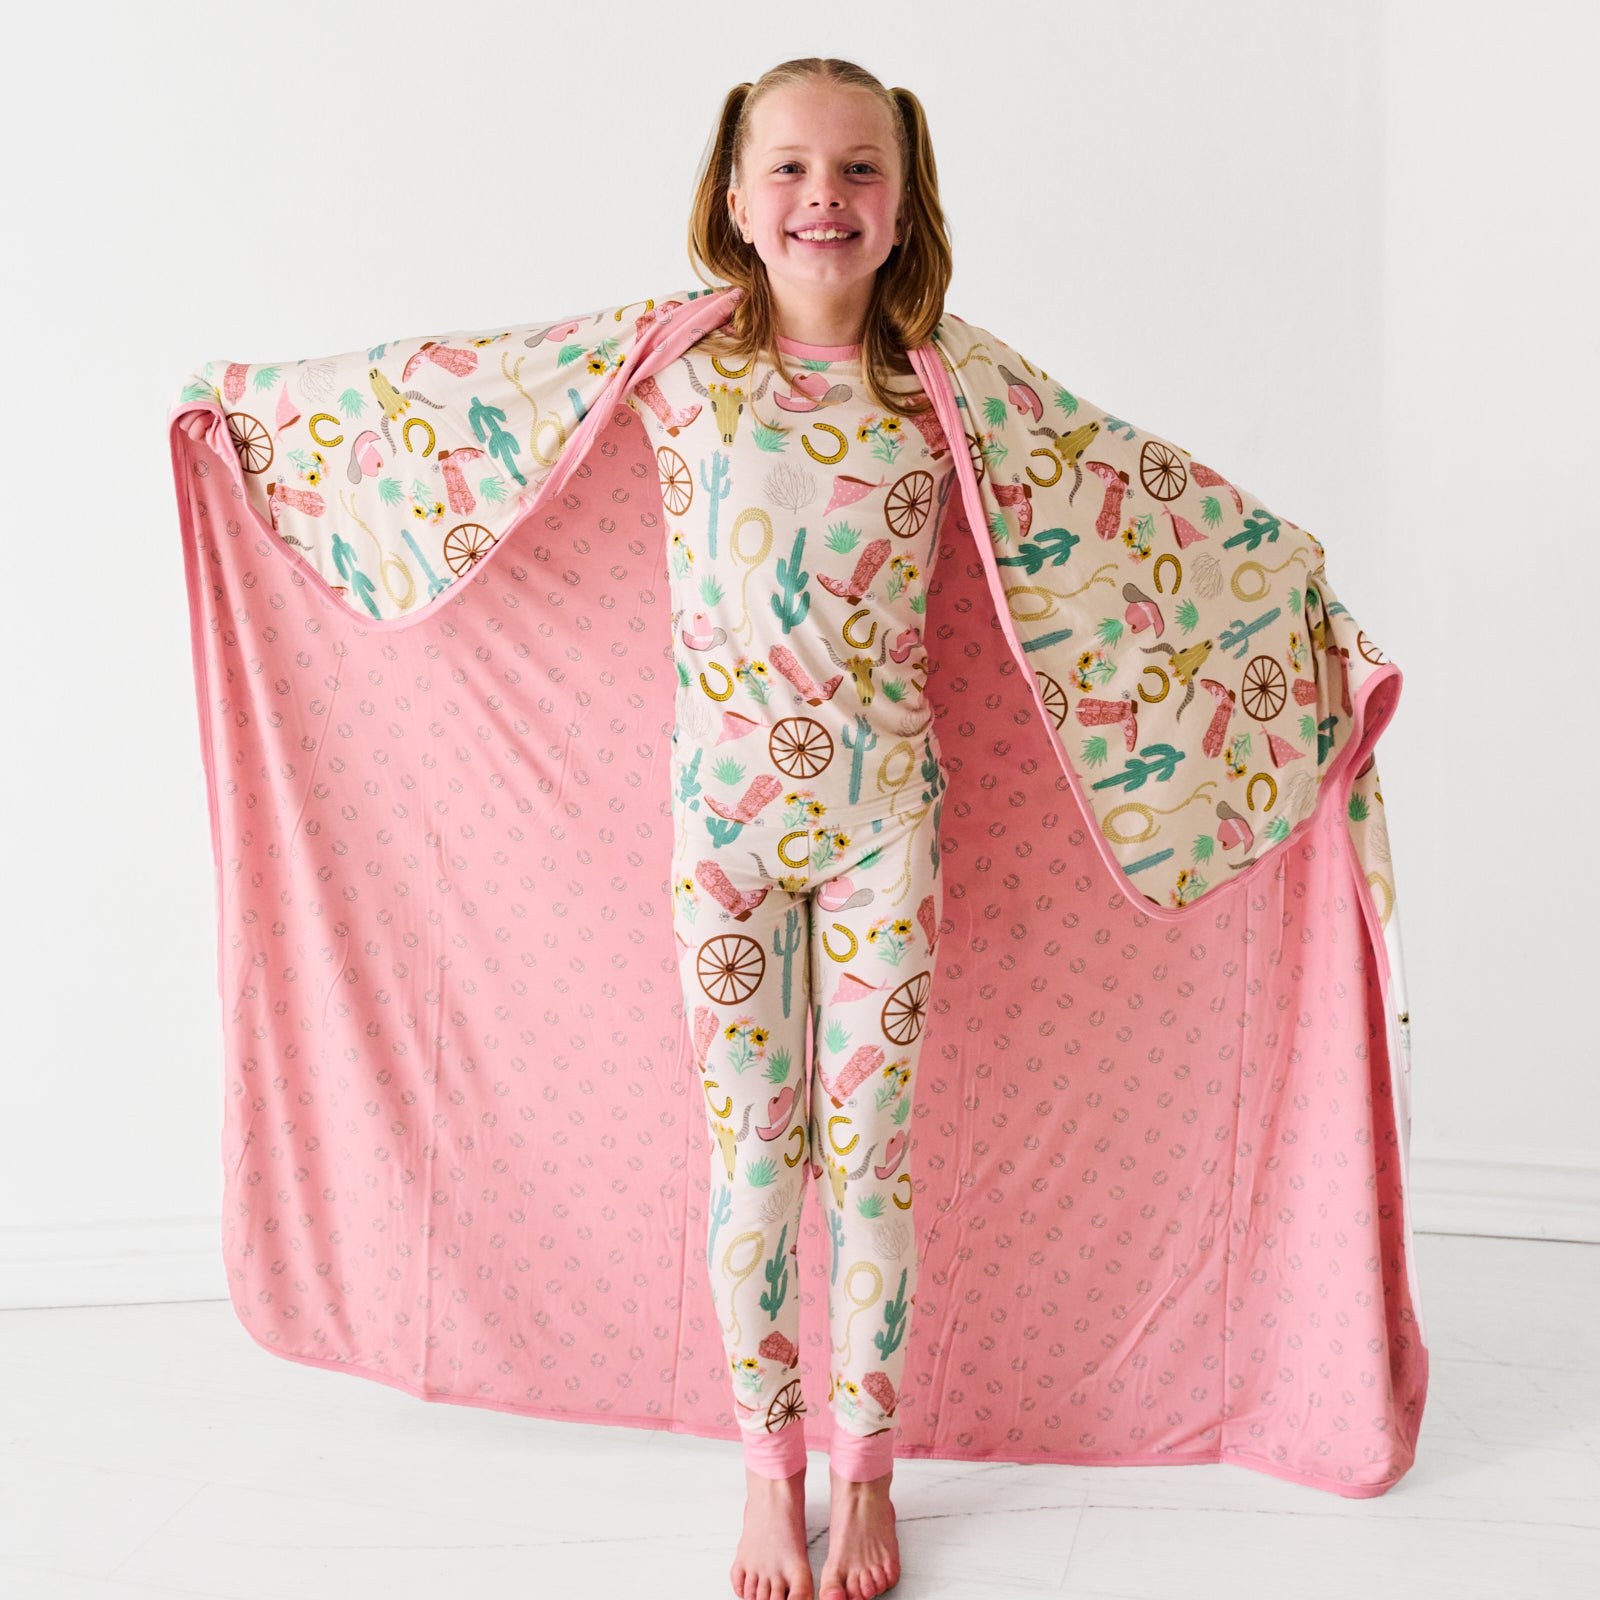 Child holding up in a Pink Ready to Rodeo large cloud blanket wearing a matching two piece pajama set